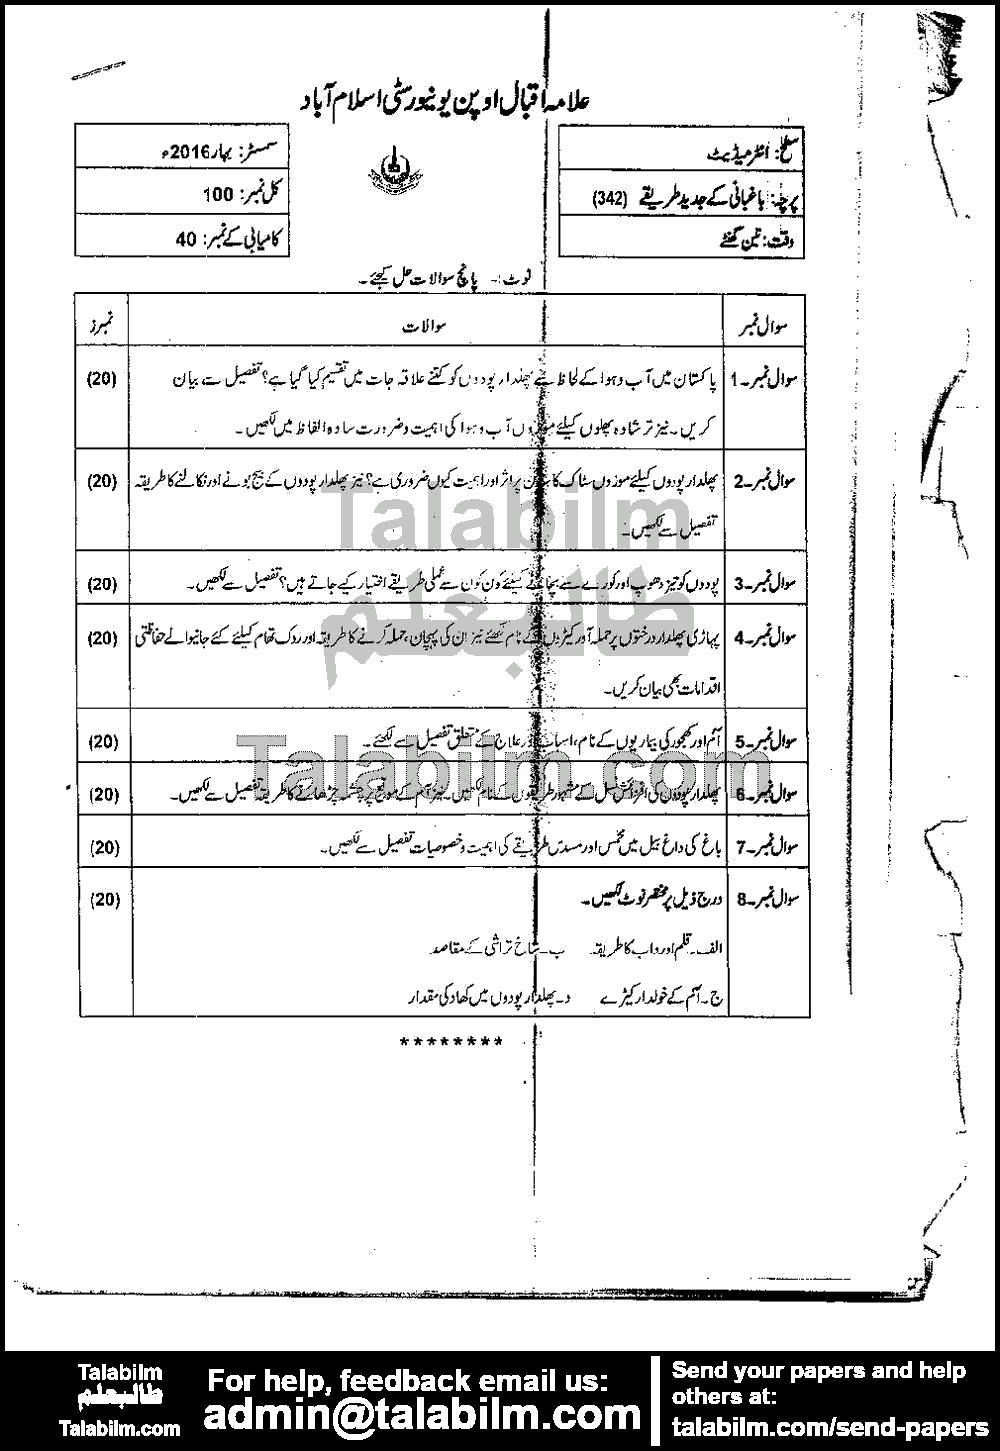 Baghbani Ky Amli Tareeqy 342 past paper for Spring 2016